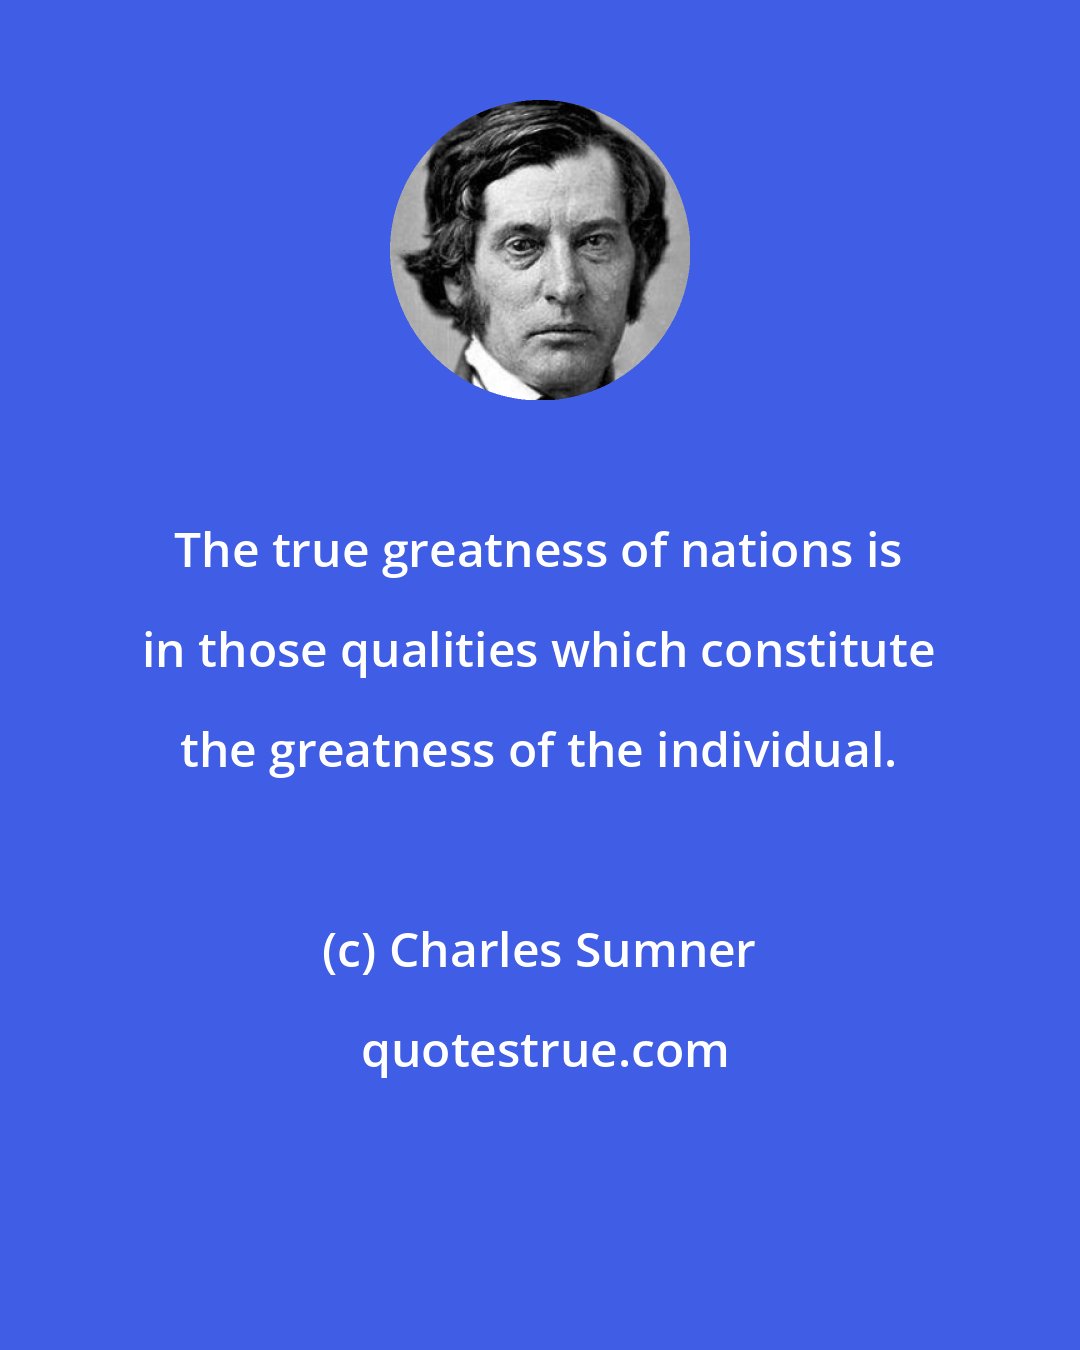 Charles Sumner: The true greatness of nations is in those qualities which constitute the greatness of the individual.